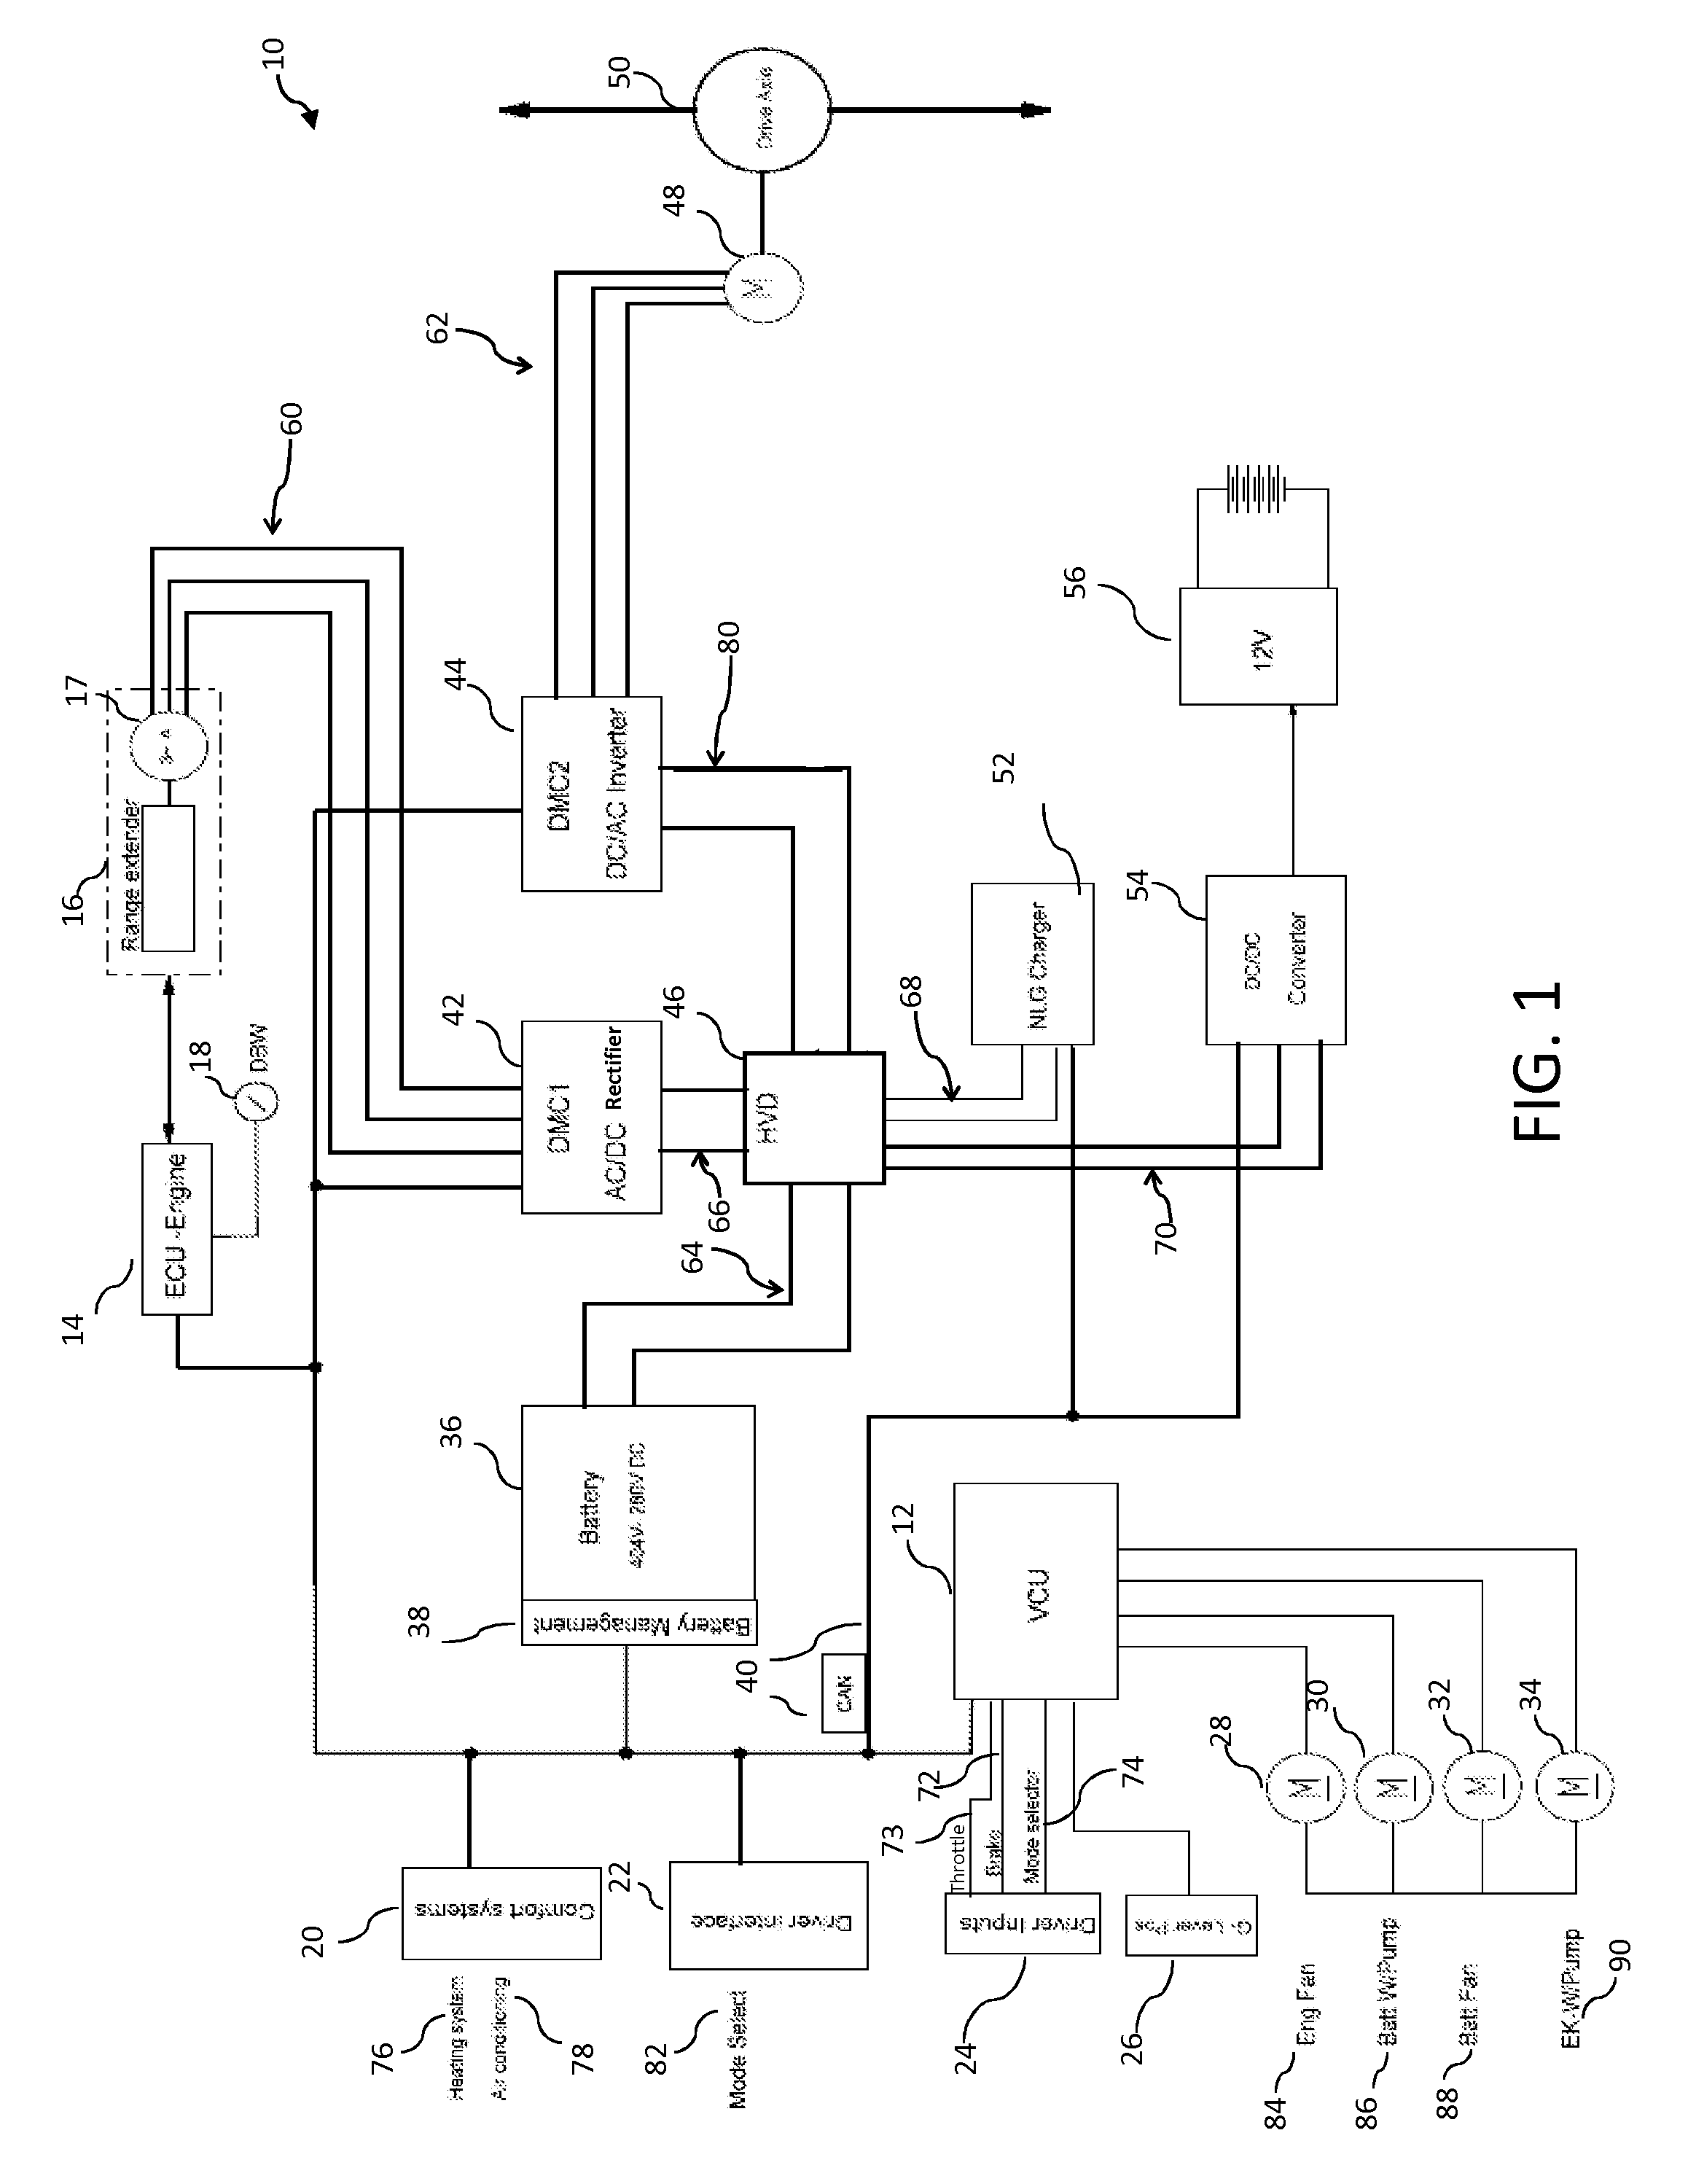 Electric vehicle and on-board battery charging apparatus therefor